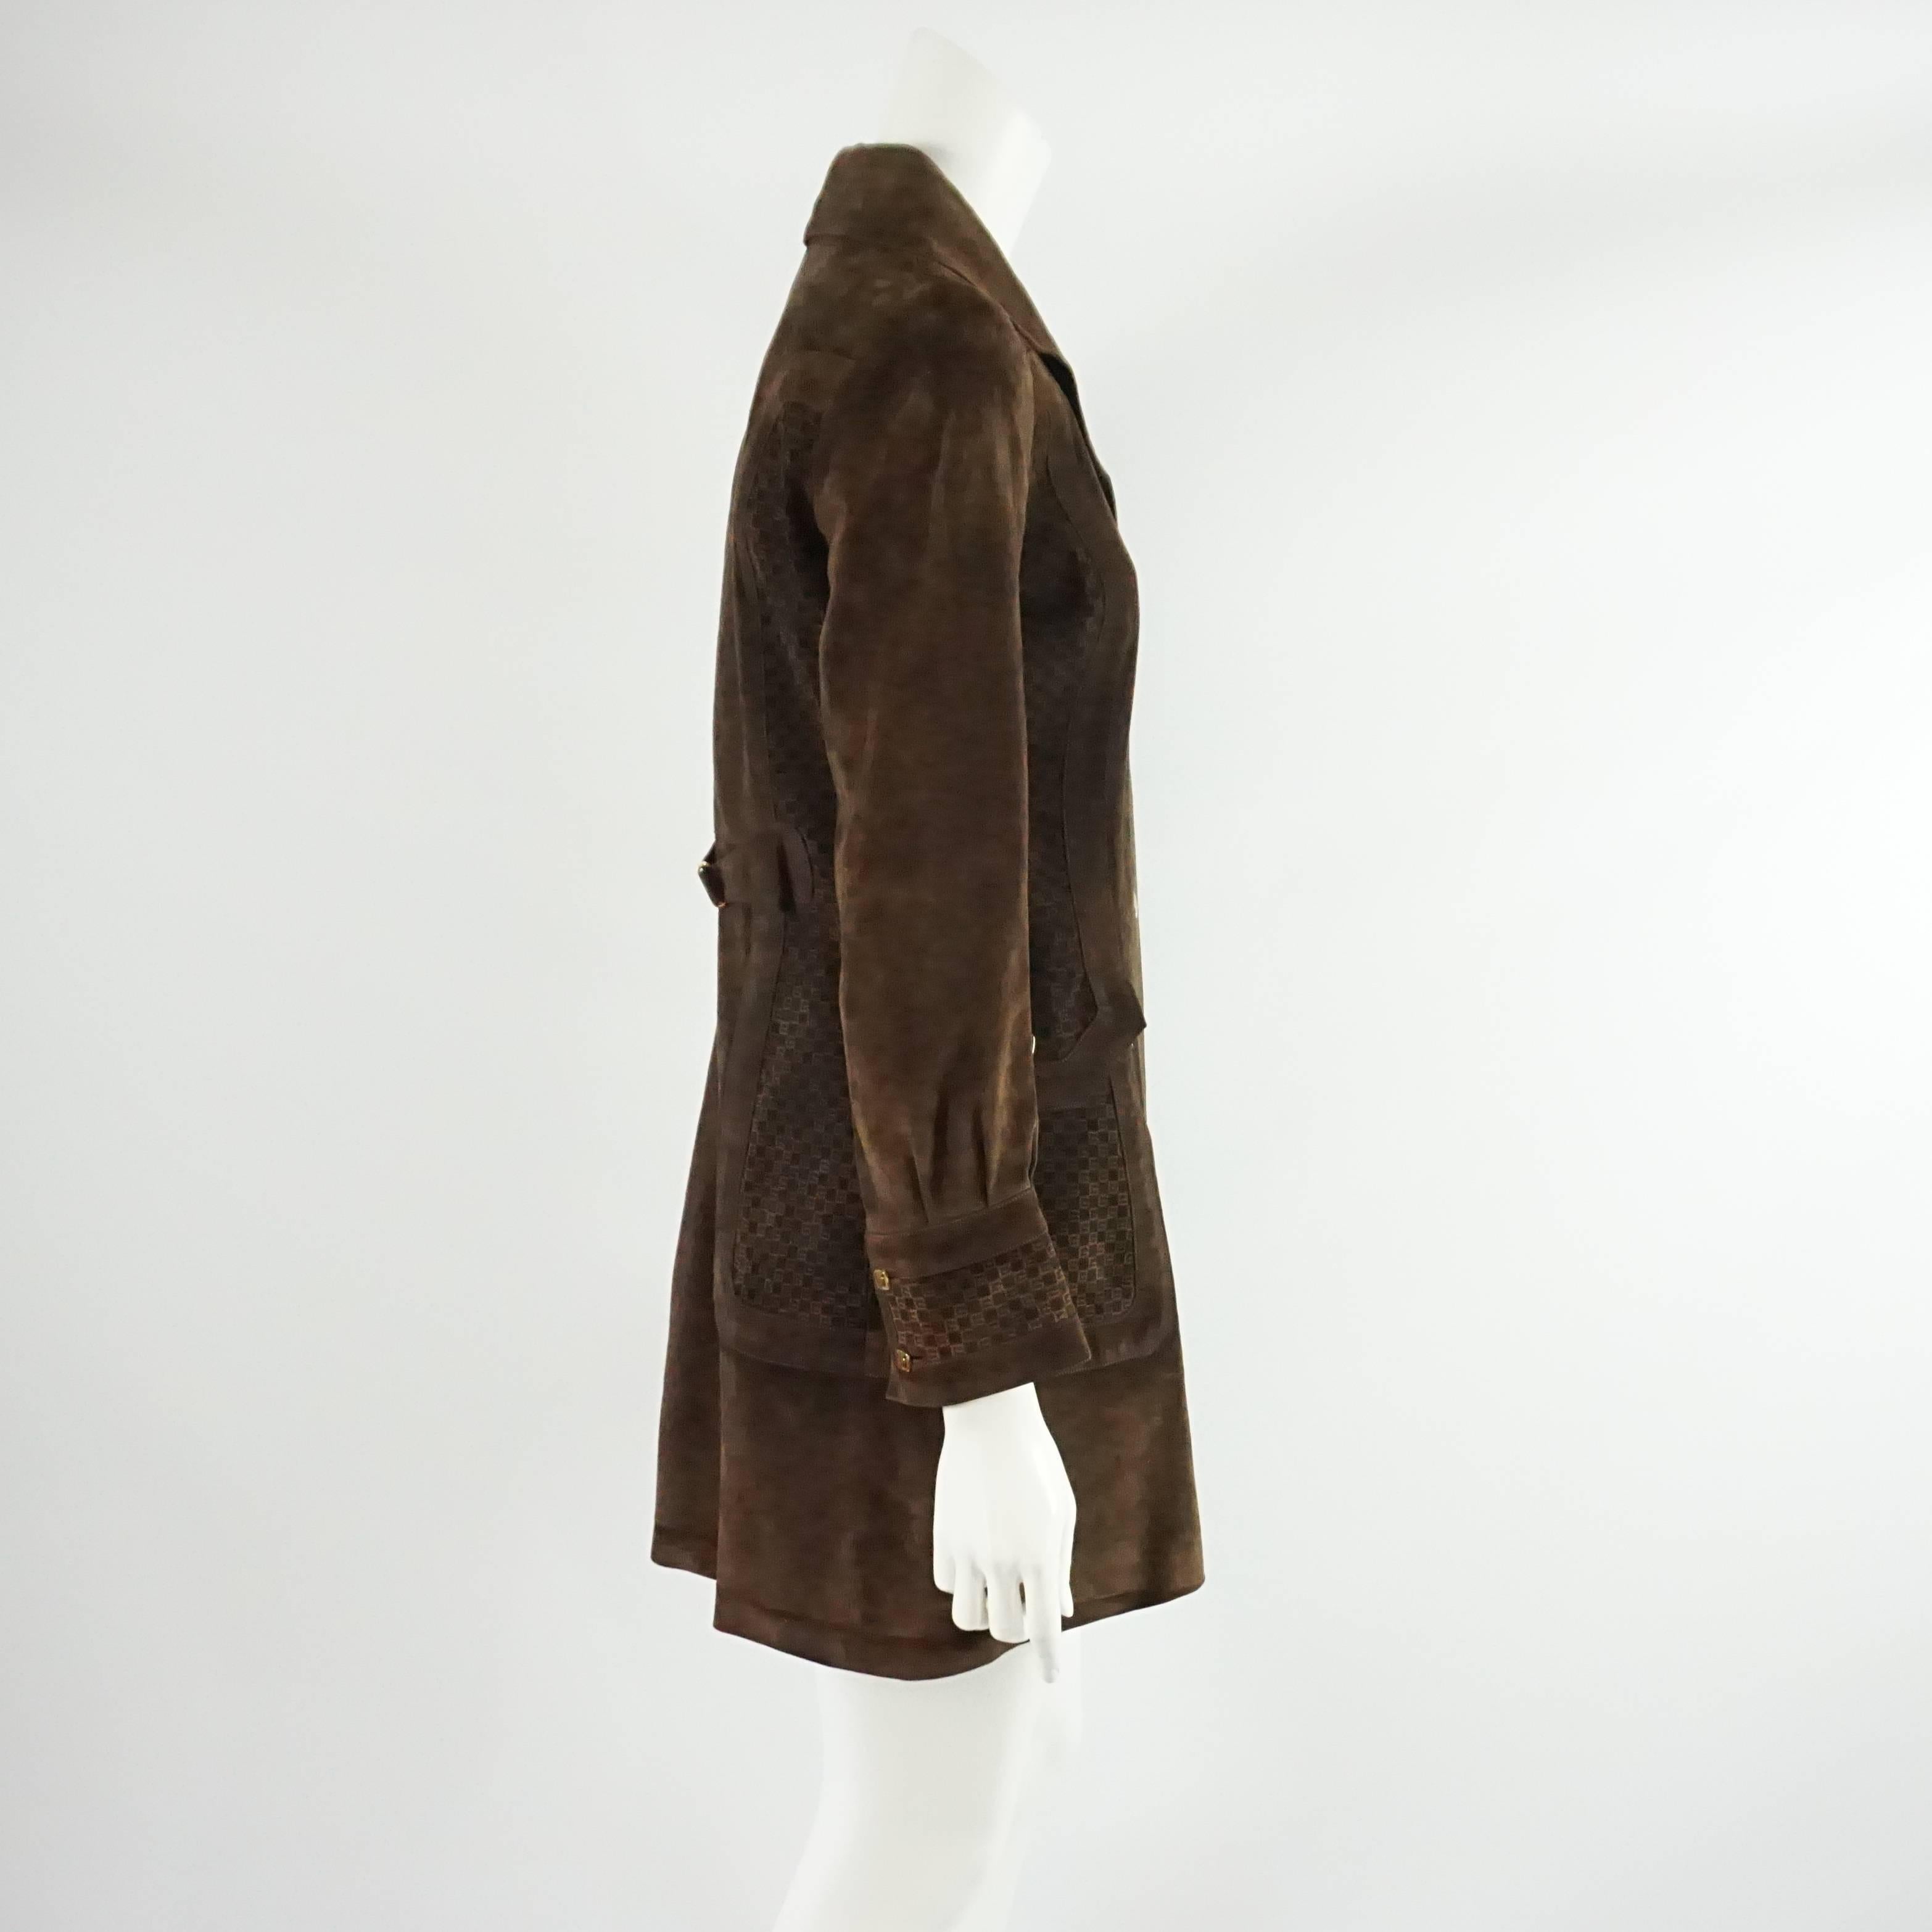 This Gucci jacket is a brown suede with monogram 